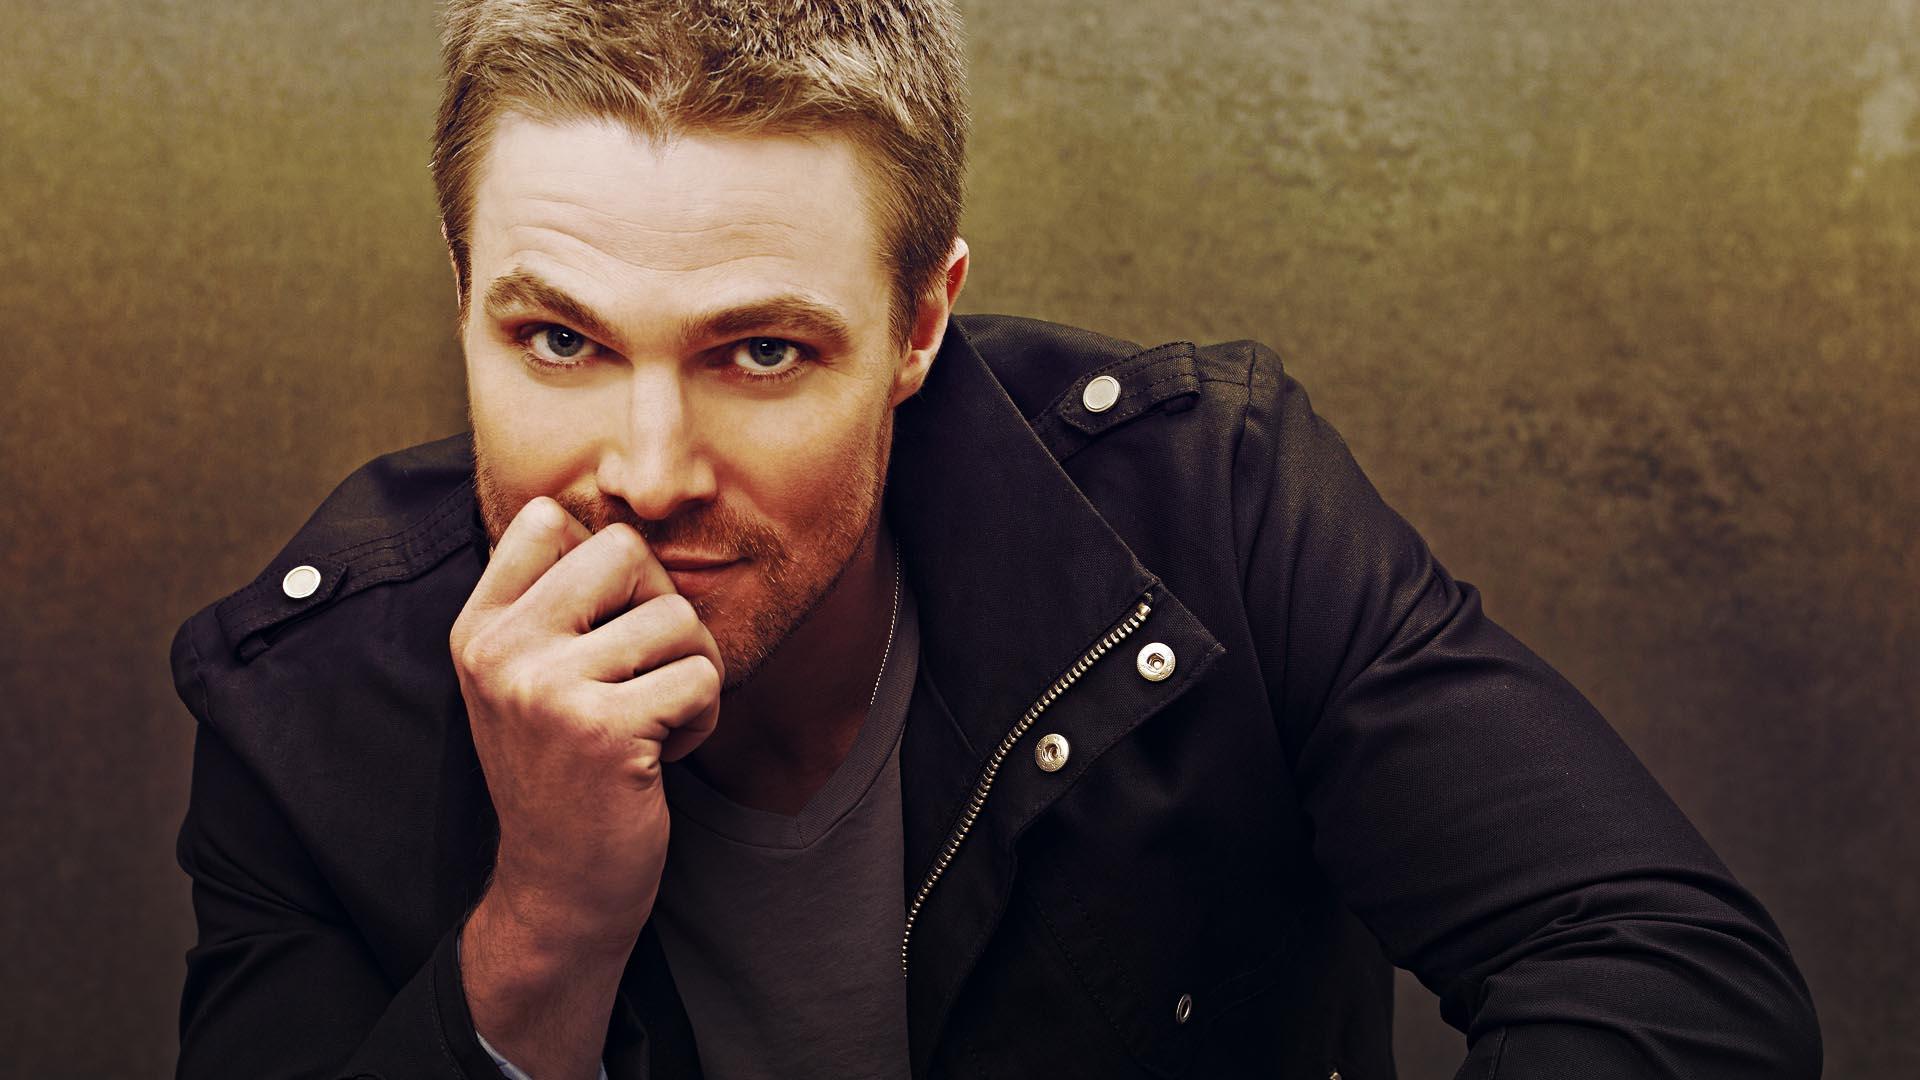 Oliver Queen - Stephen Amell Photo Shoot - HD Wallpaper 